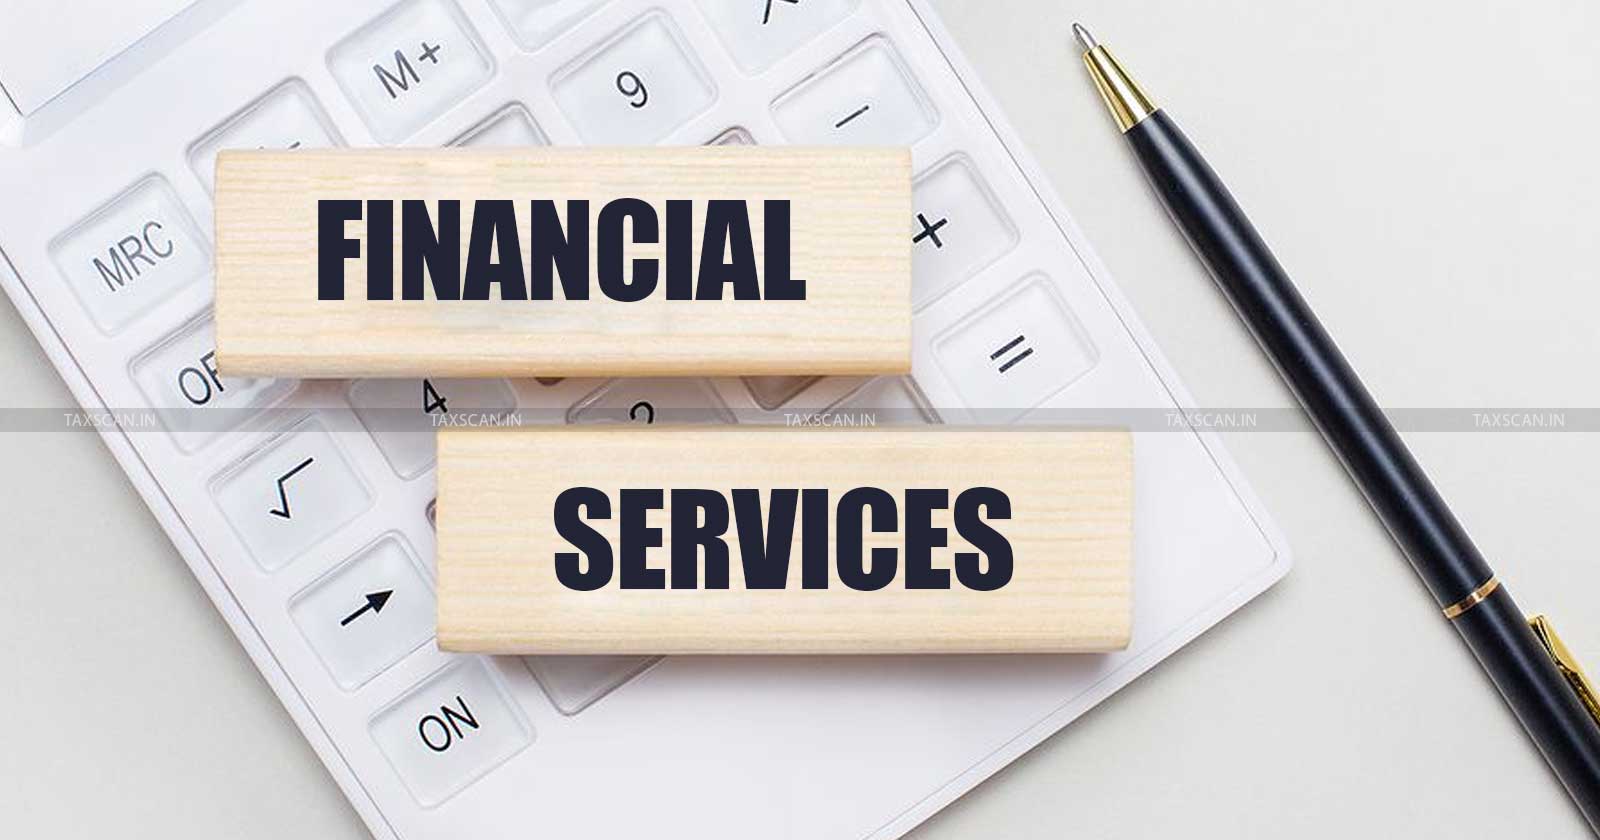 Central Government - Financial Services - Financial Services under IFSC Authority Act - Authority Act - IFSC - taxscan